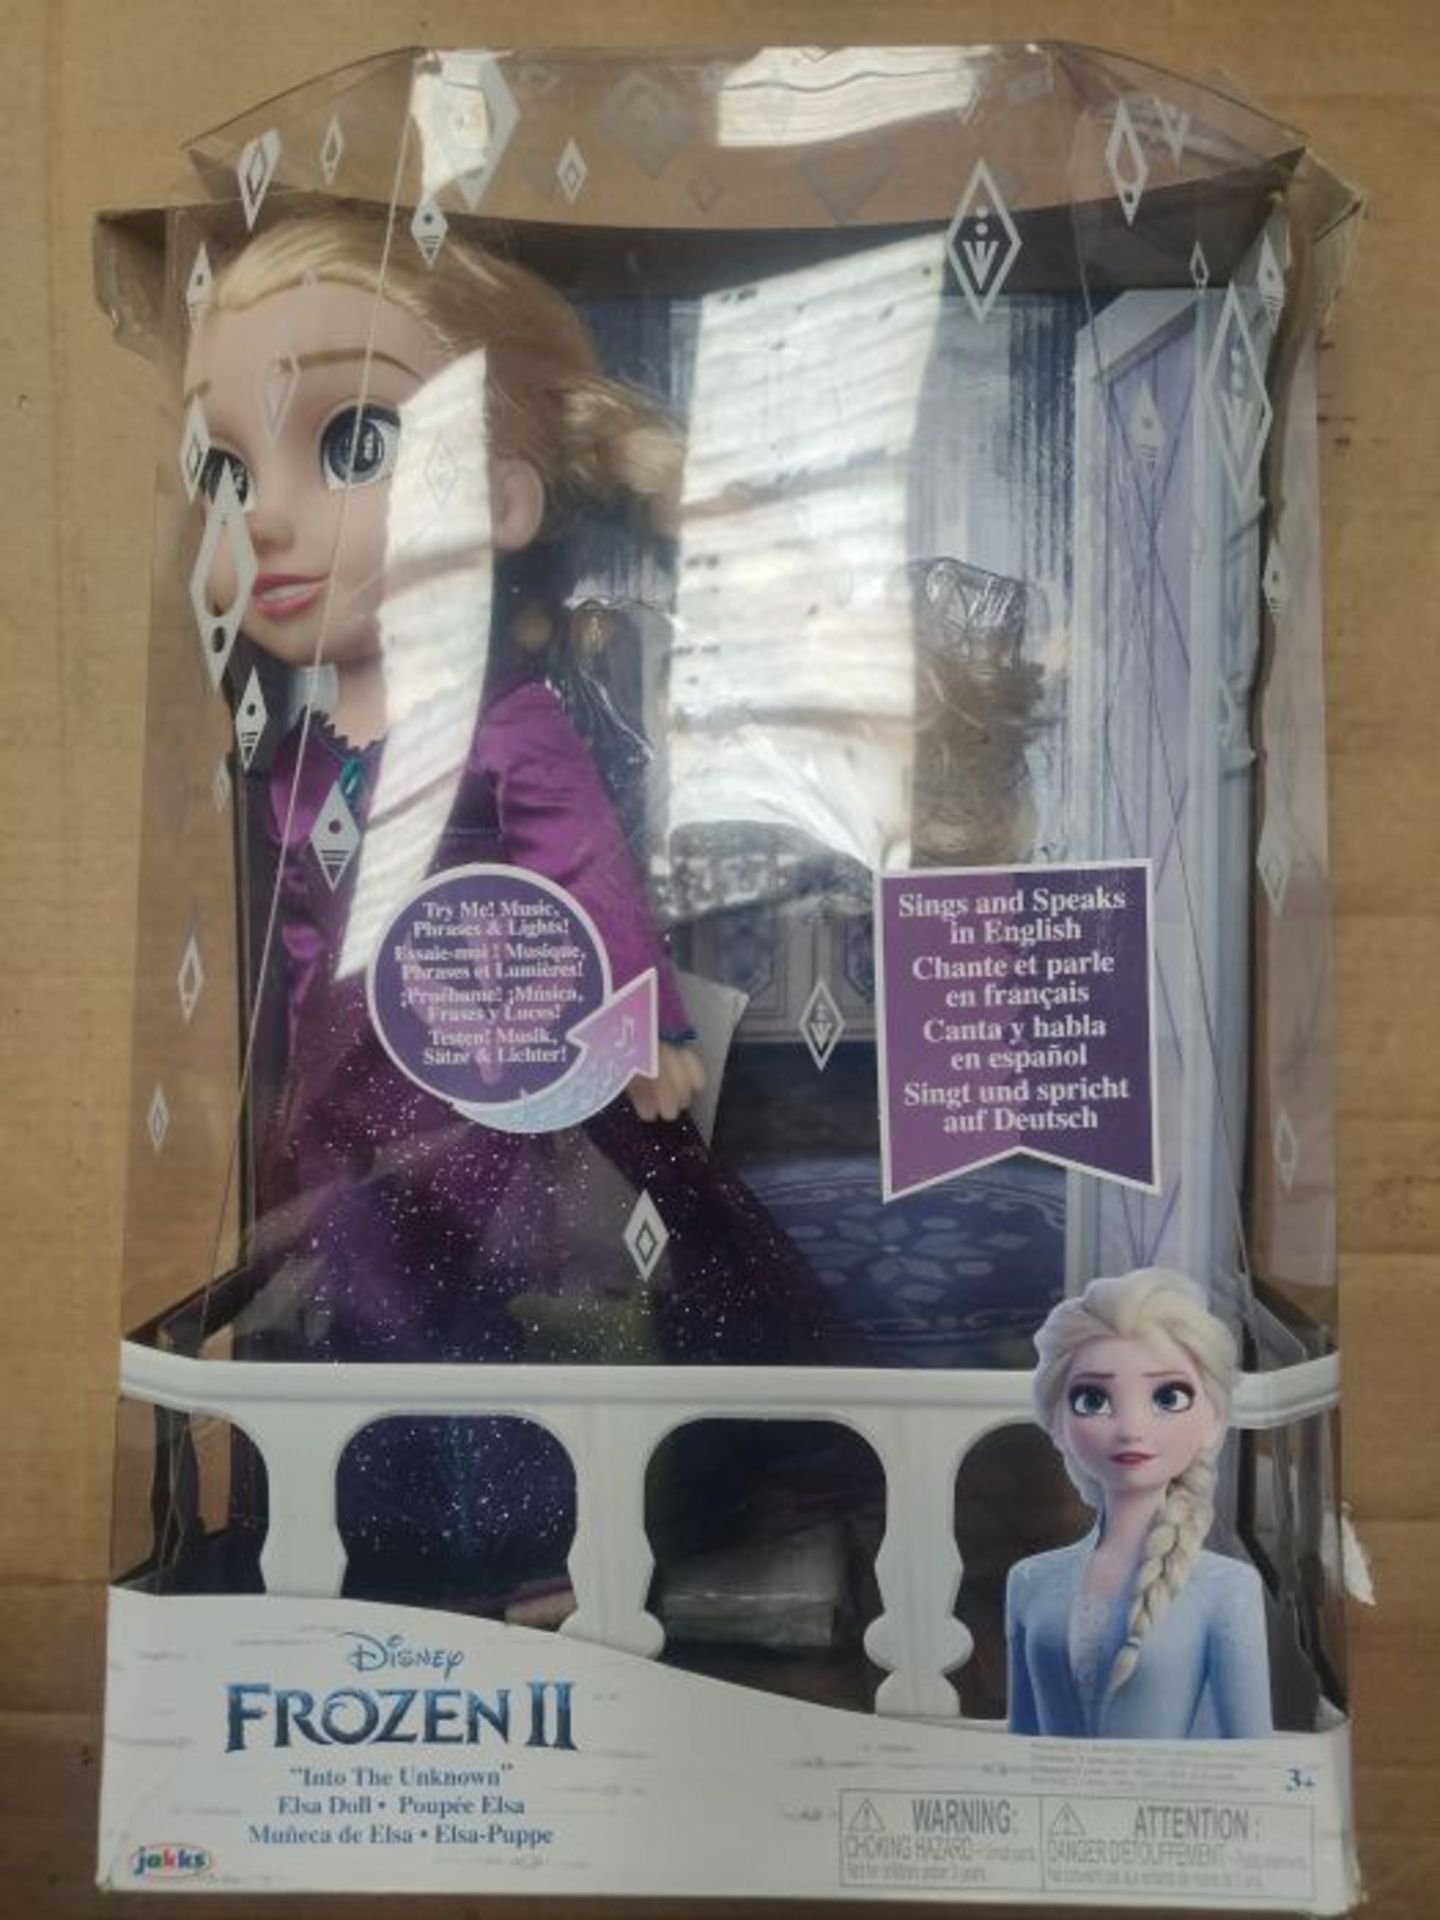 Frozen 2 207474 Disney Elsa Musical Doll Sings Into The Unknown Fashion, Ages 3+ - Image 2 of 3